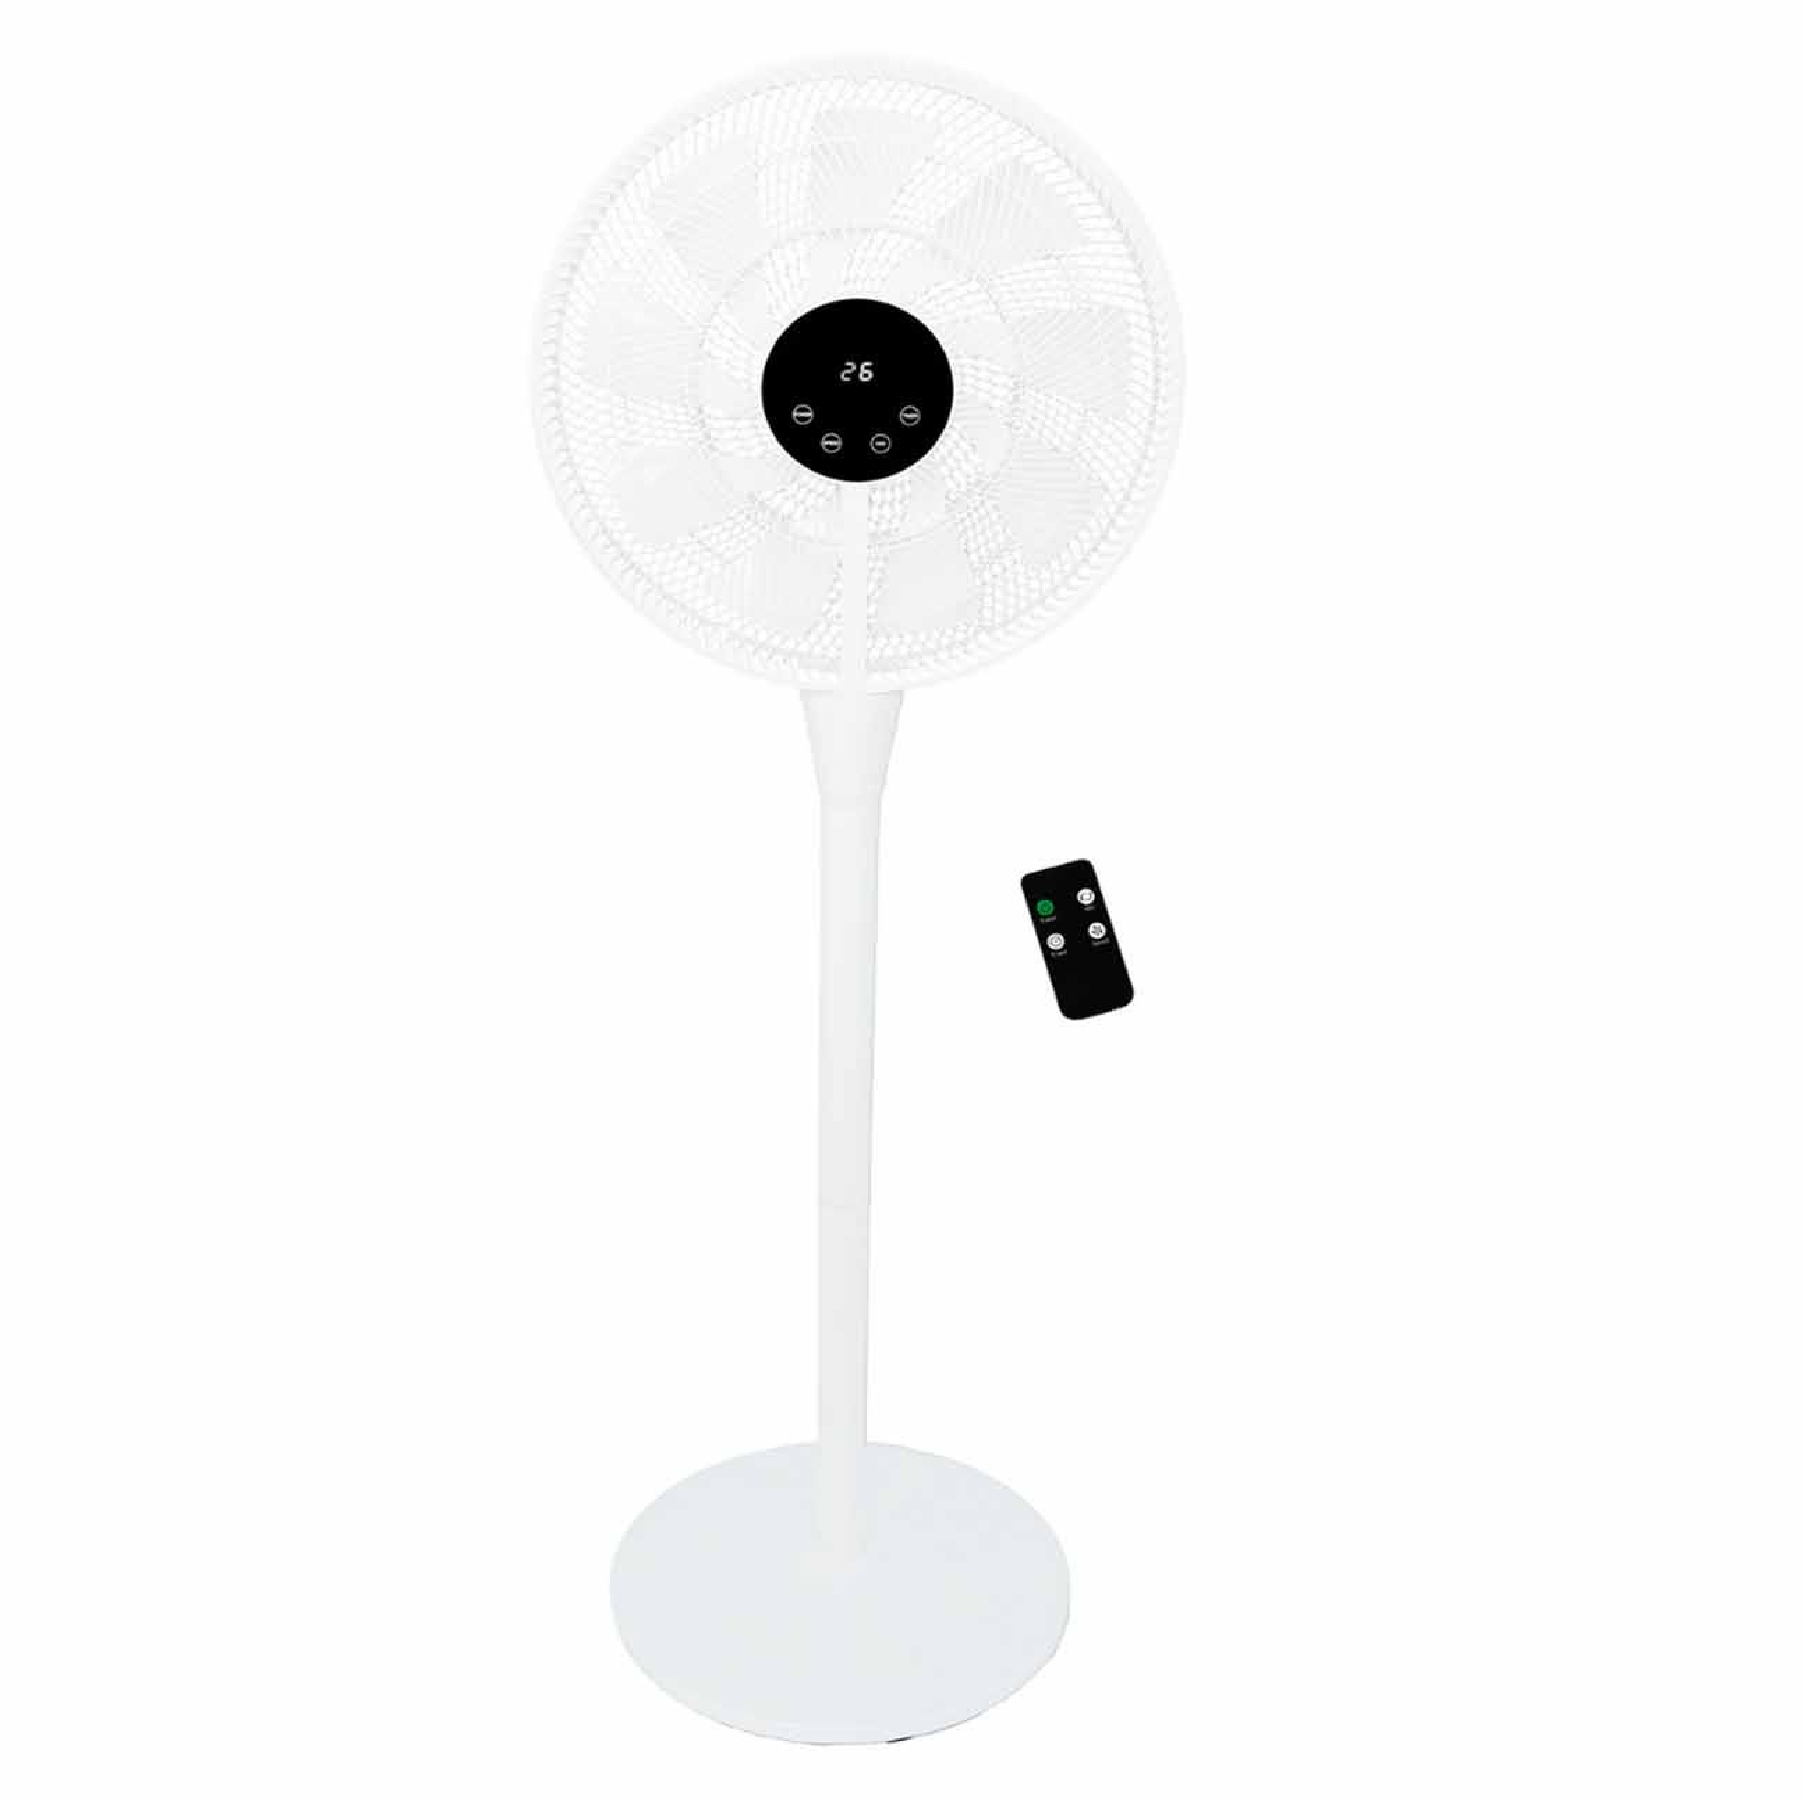 Morries MS-1611DCSFR-WH 16"/405MM 2-IN-1 DC Stand Fan With Remote DC MOTOR